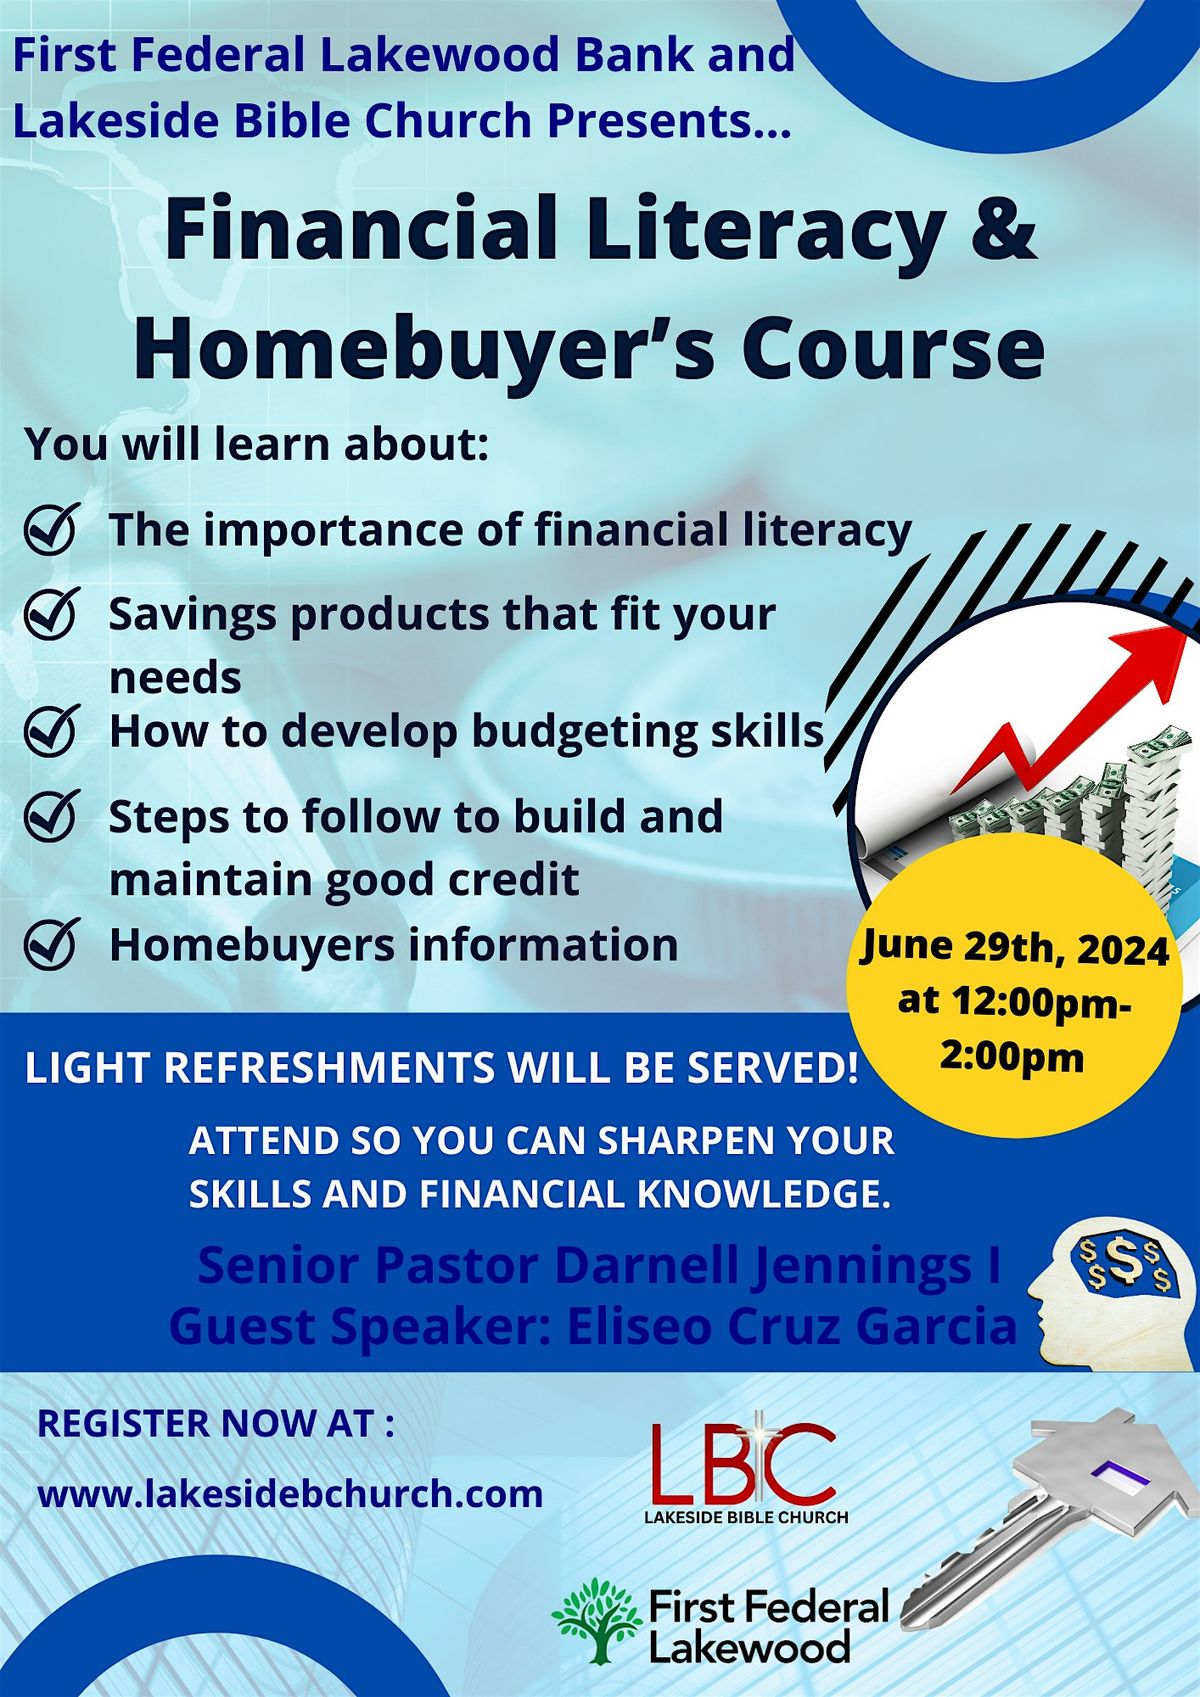 Financial Literacy & Homebuyer's Course